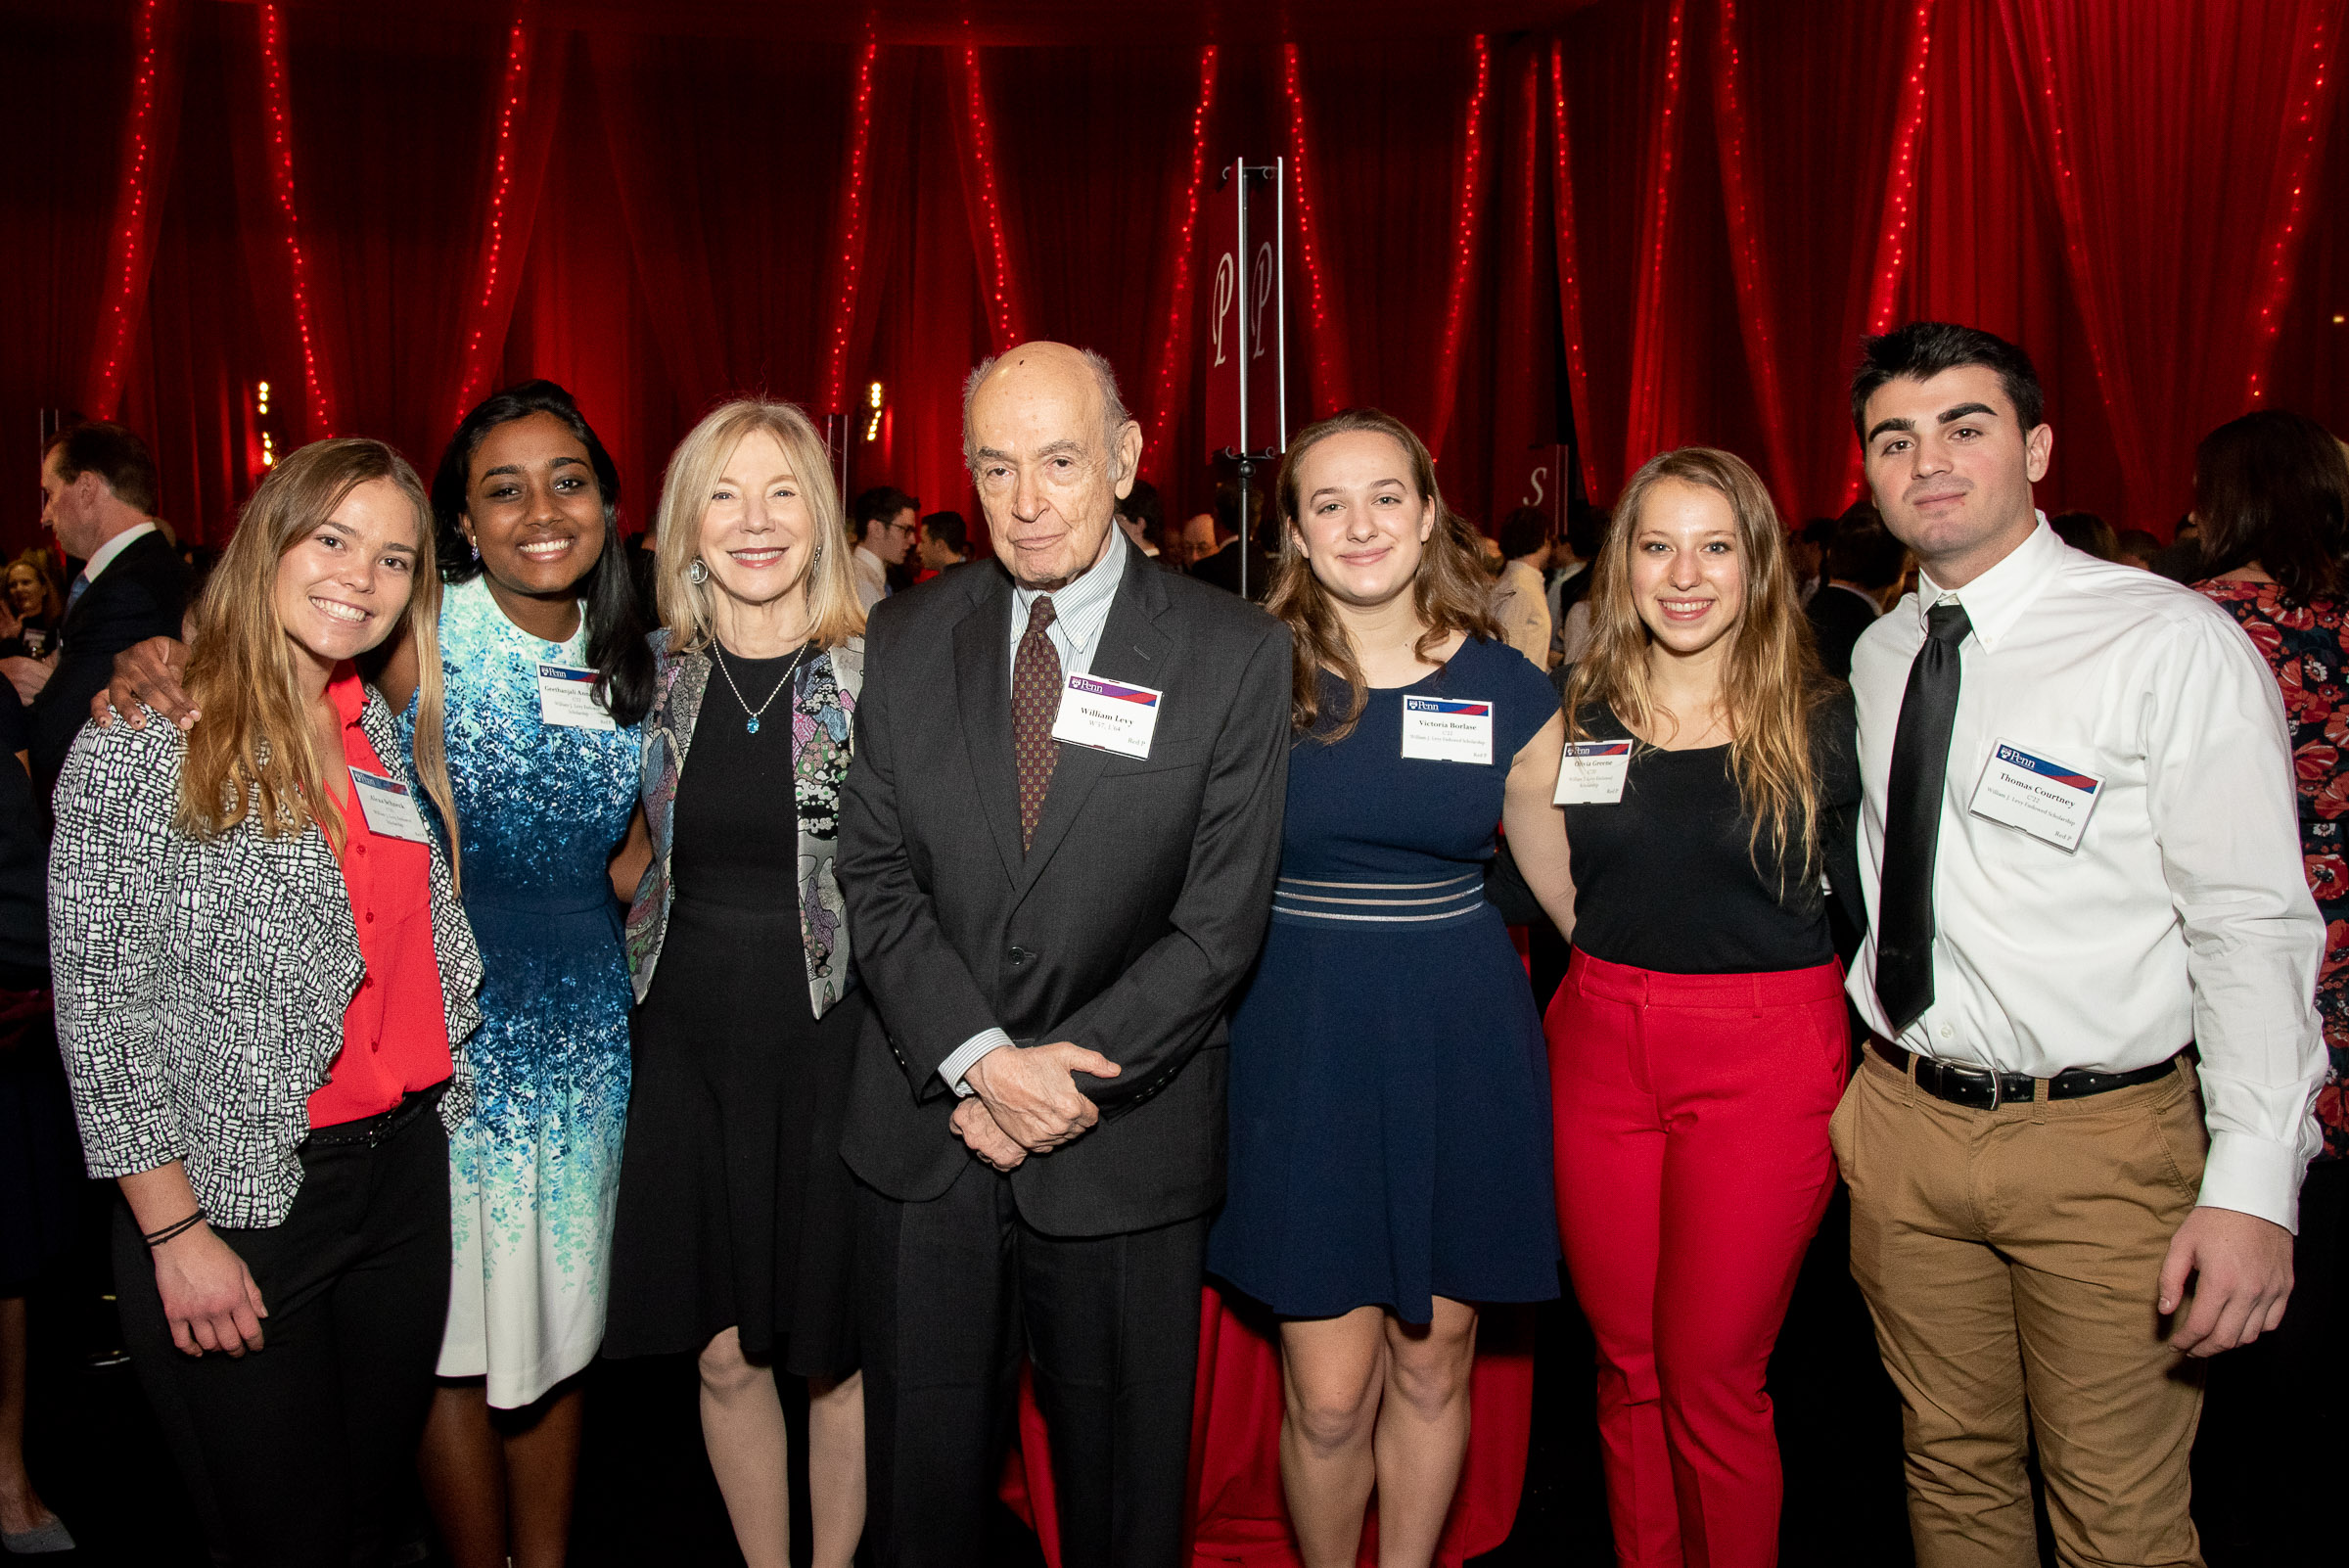 Dr. Gutmann with Bill Levy and students